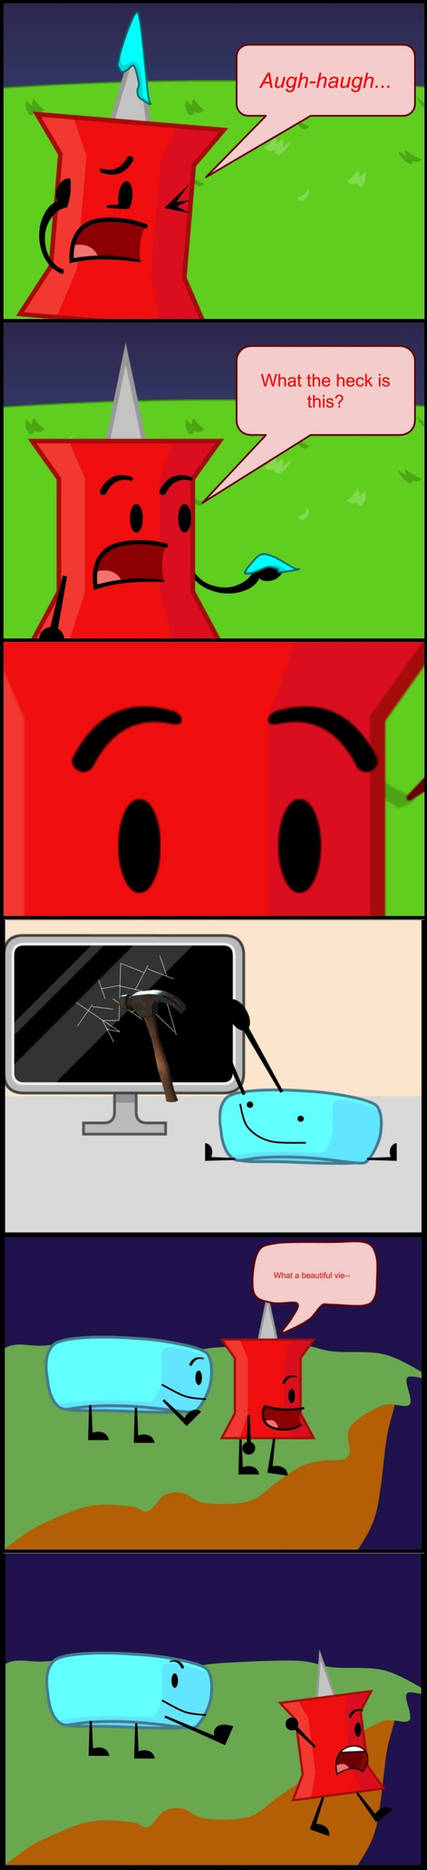 BFDI Comic 3 Preview by DoomesPro93 on DeviantArt